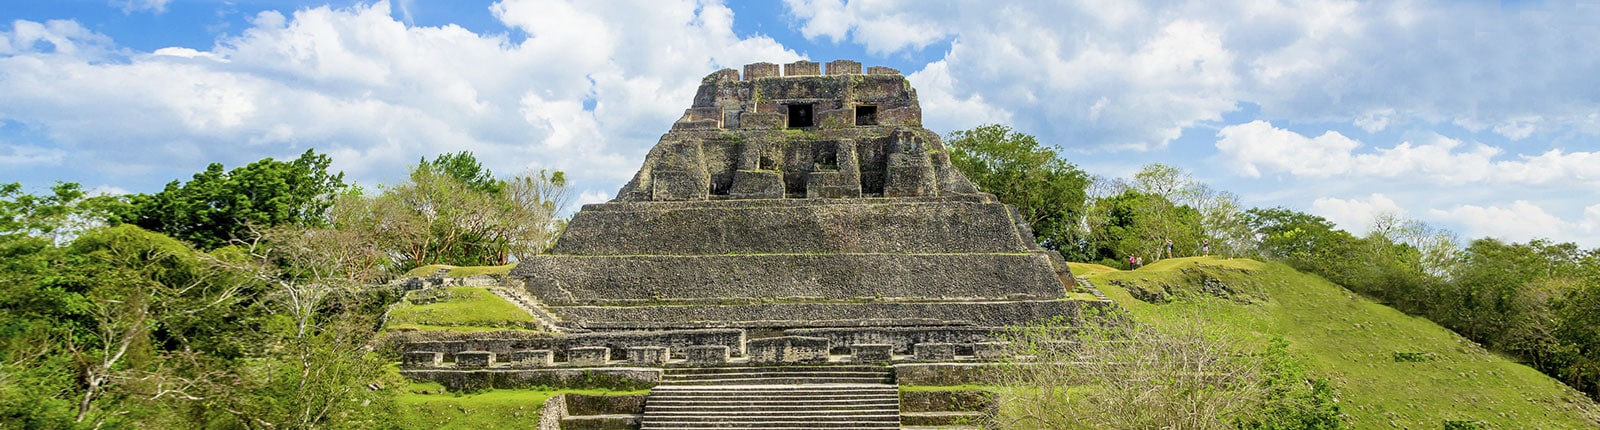 Beautiful view of the ancient Mayan ruins in Belize